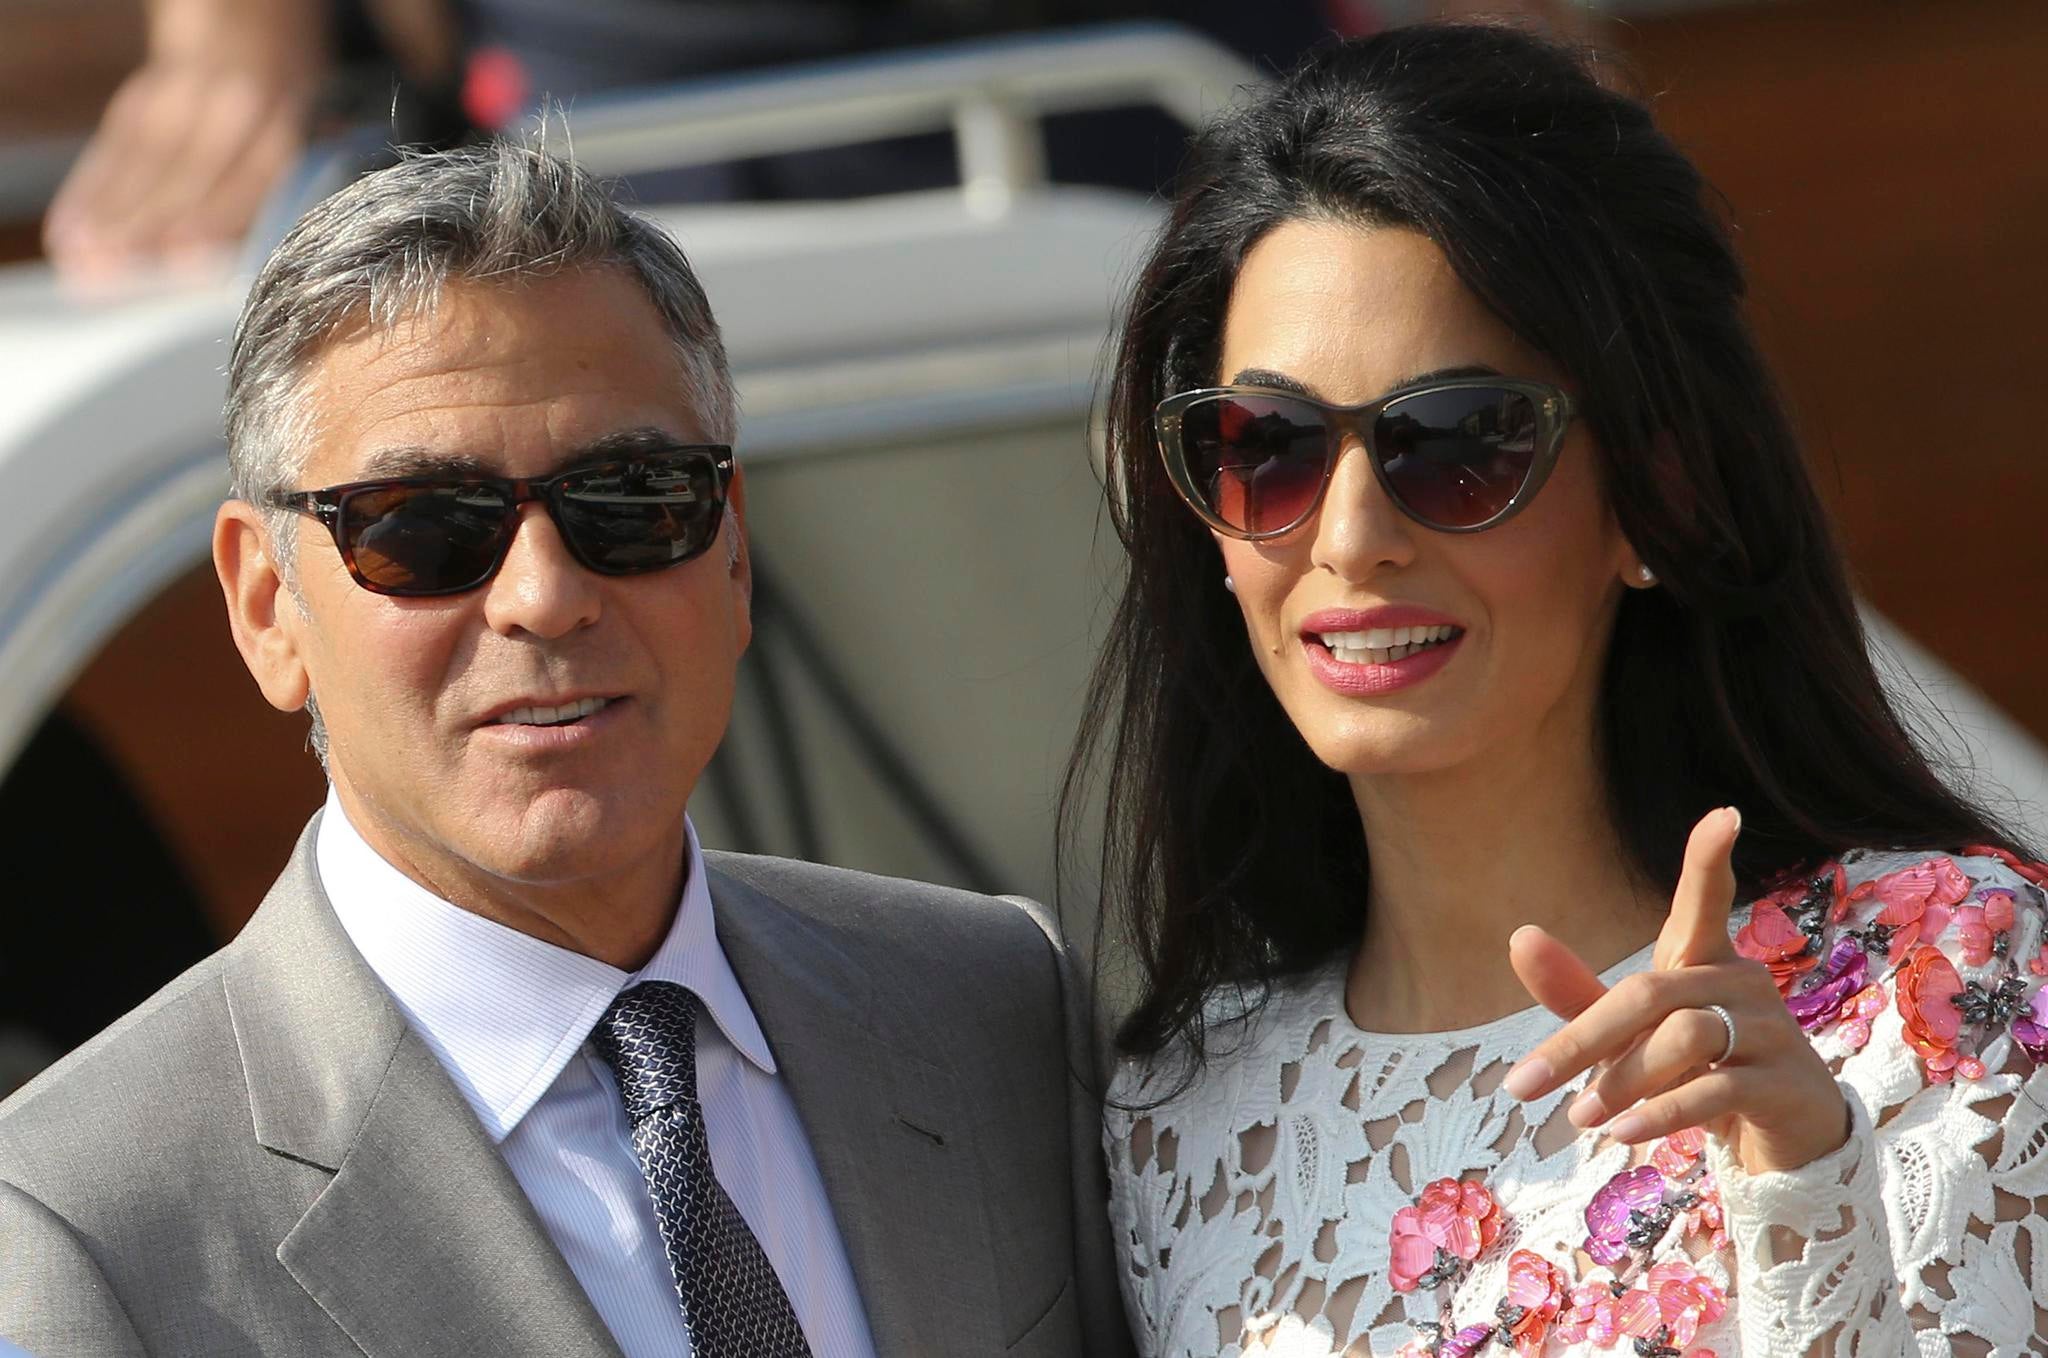 George Clooney and his Lebanon-born British fiancée Amal Alamuddin take a water taxi after tying the knot at a ceremony yesterday